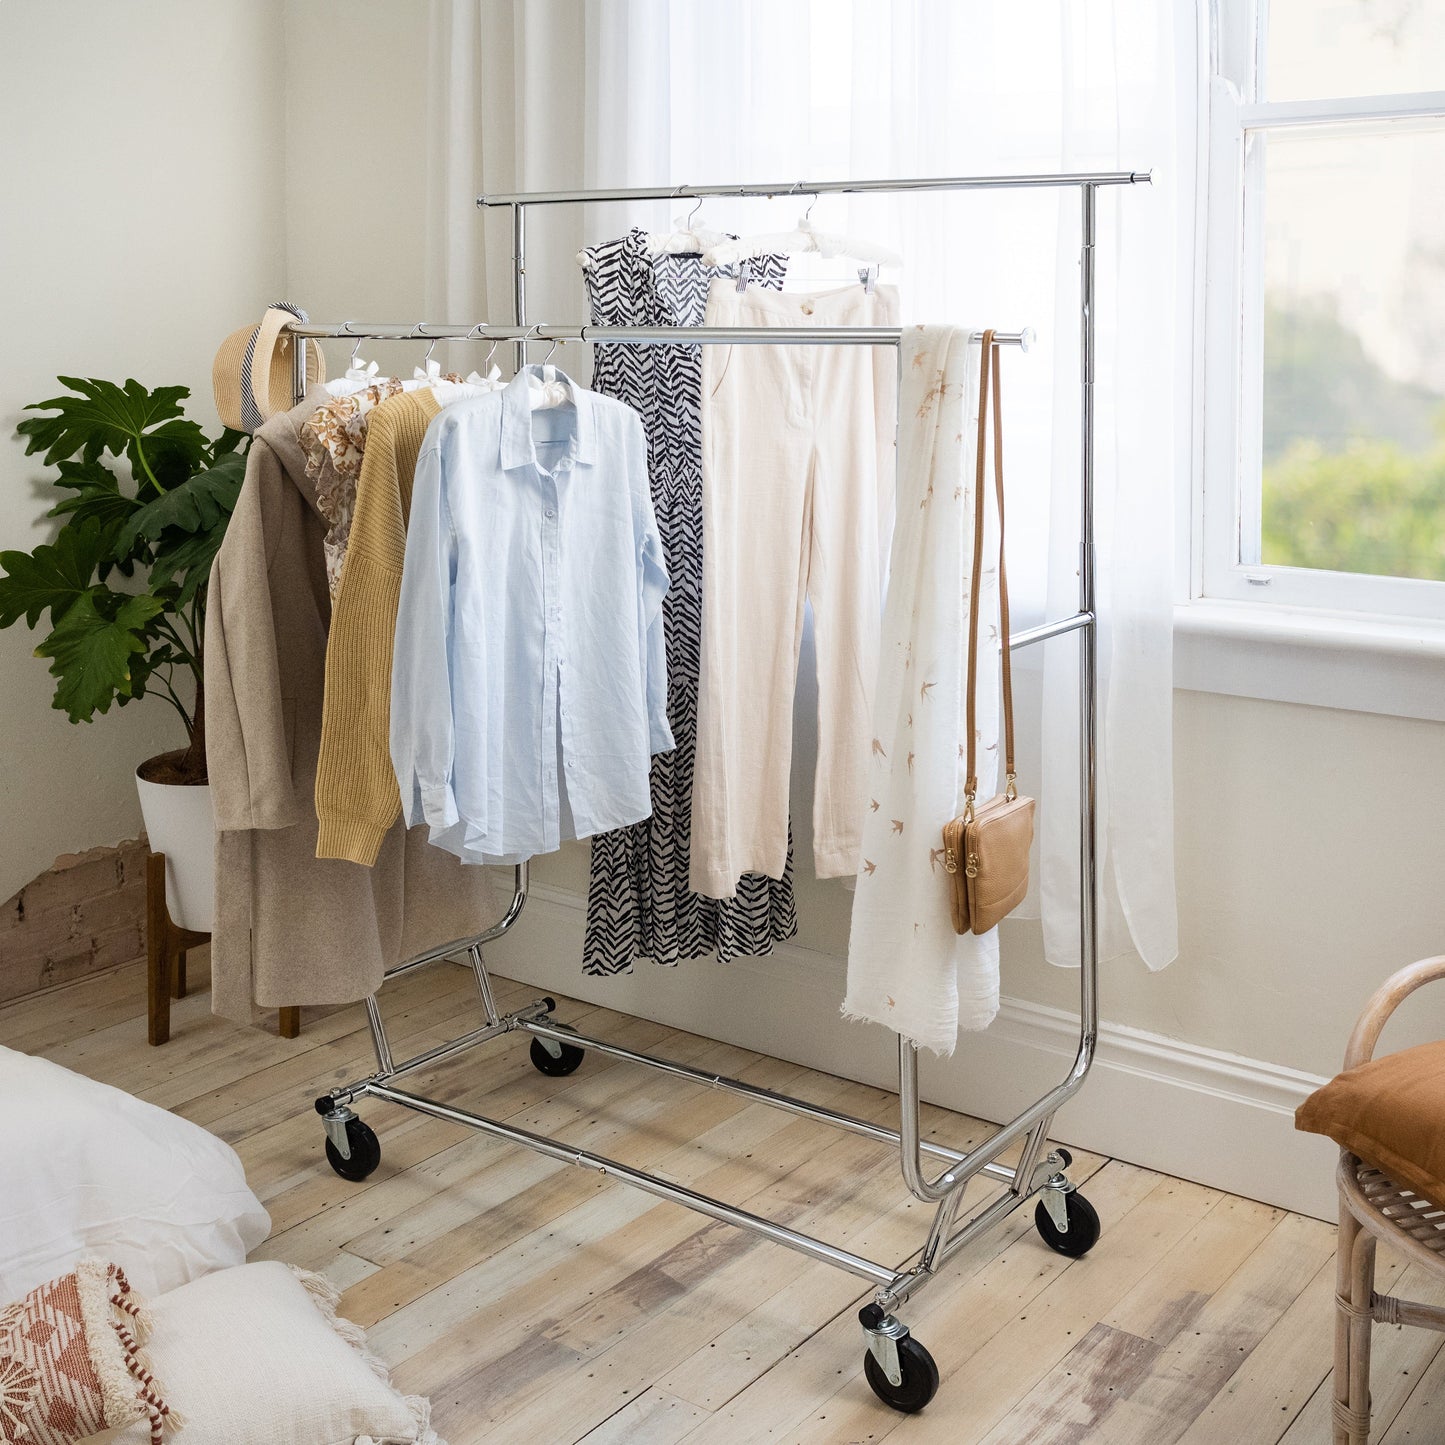 Heavy Duty Clothes Rack - 210kgs Weight Capacity - Four Large Rubber Casters